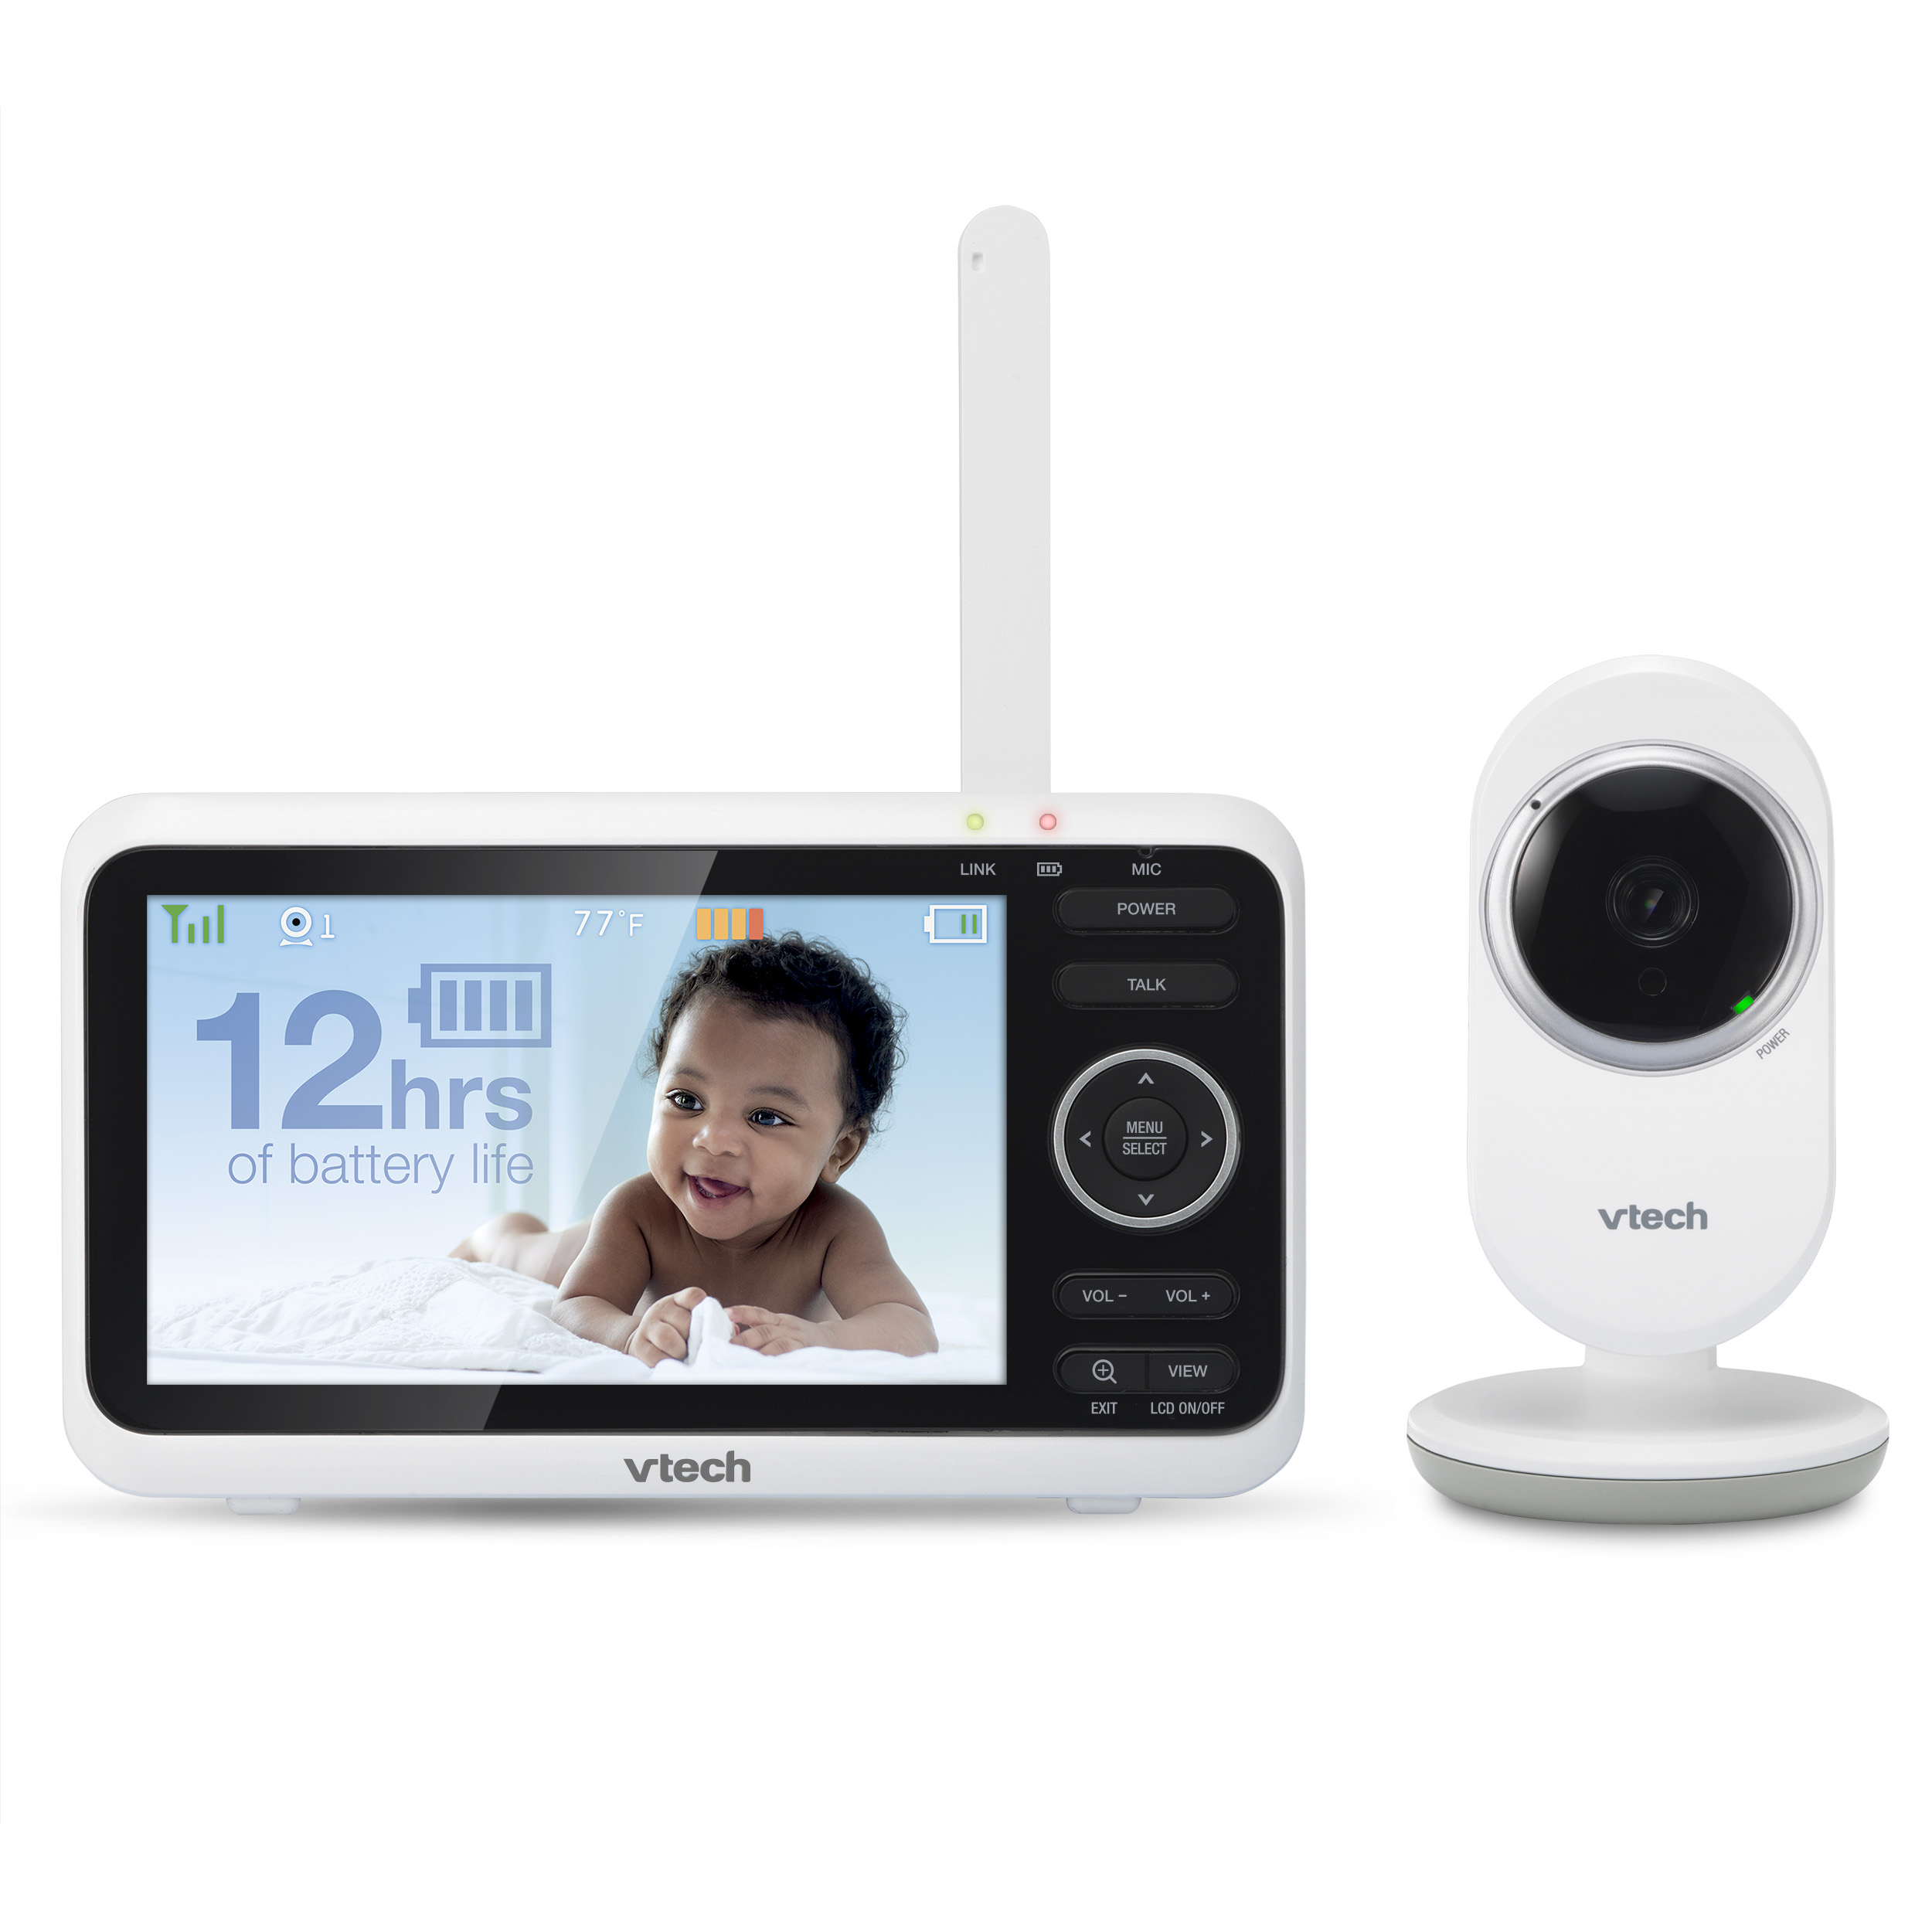 5" Digital Video Baby Monitor with Full-Color and Automatic Night Vision, White - view 1